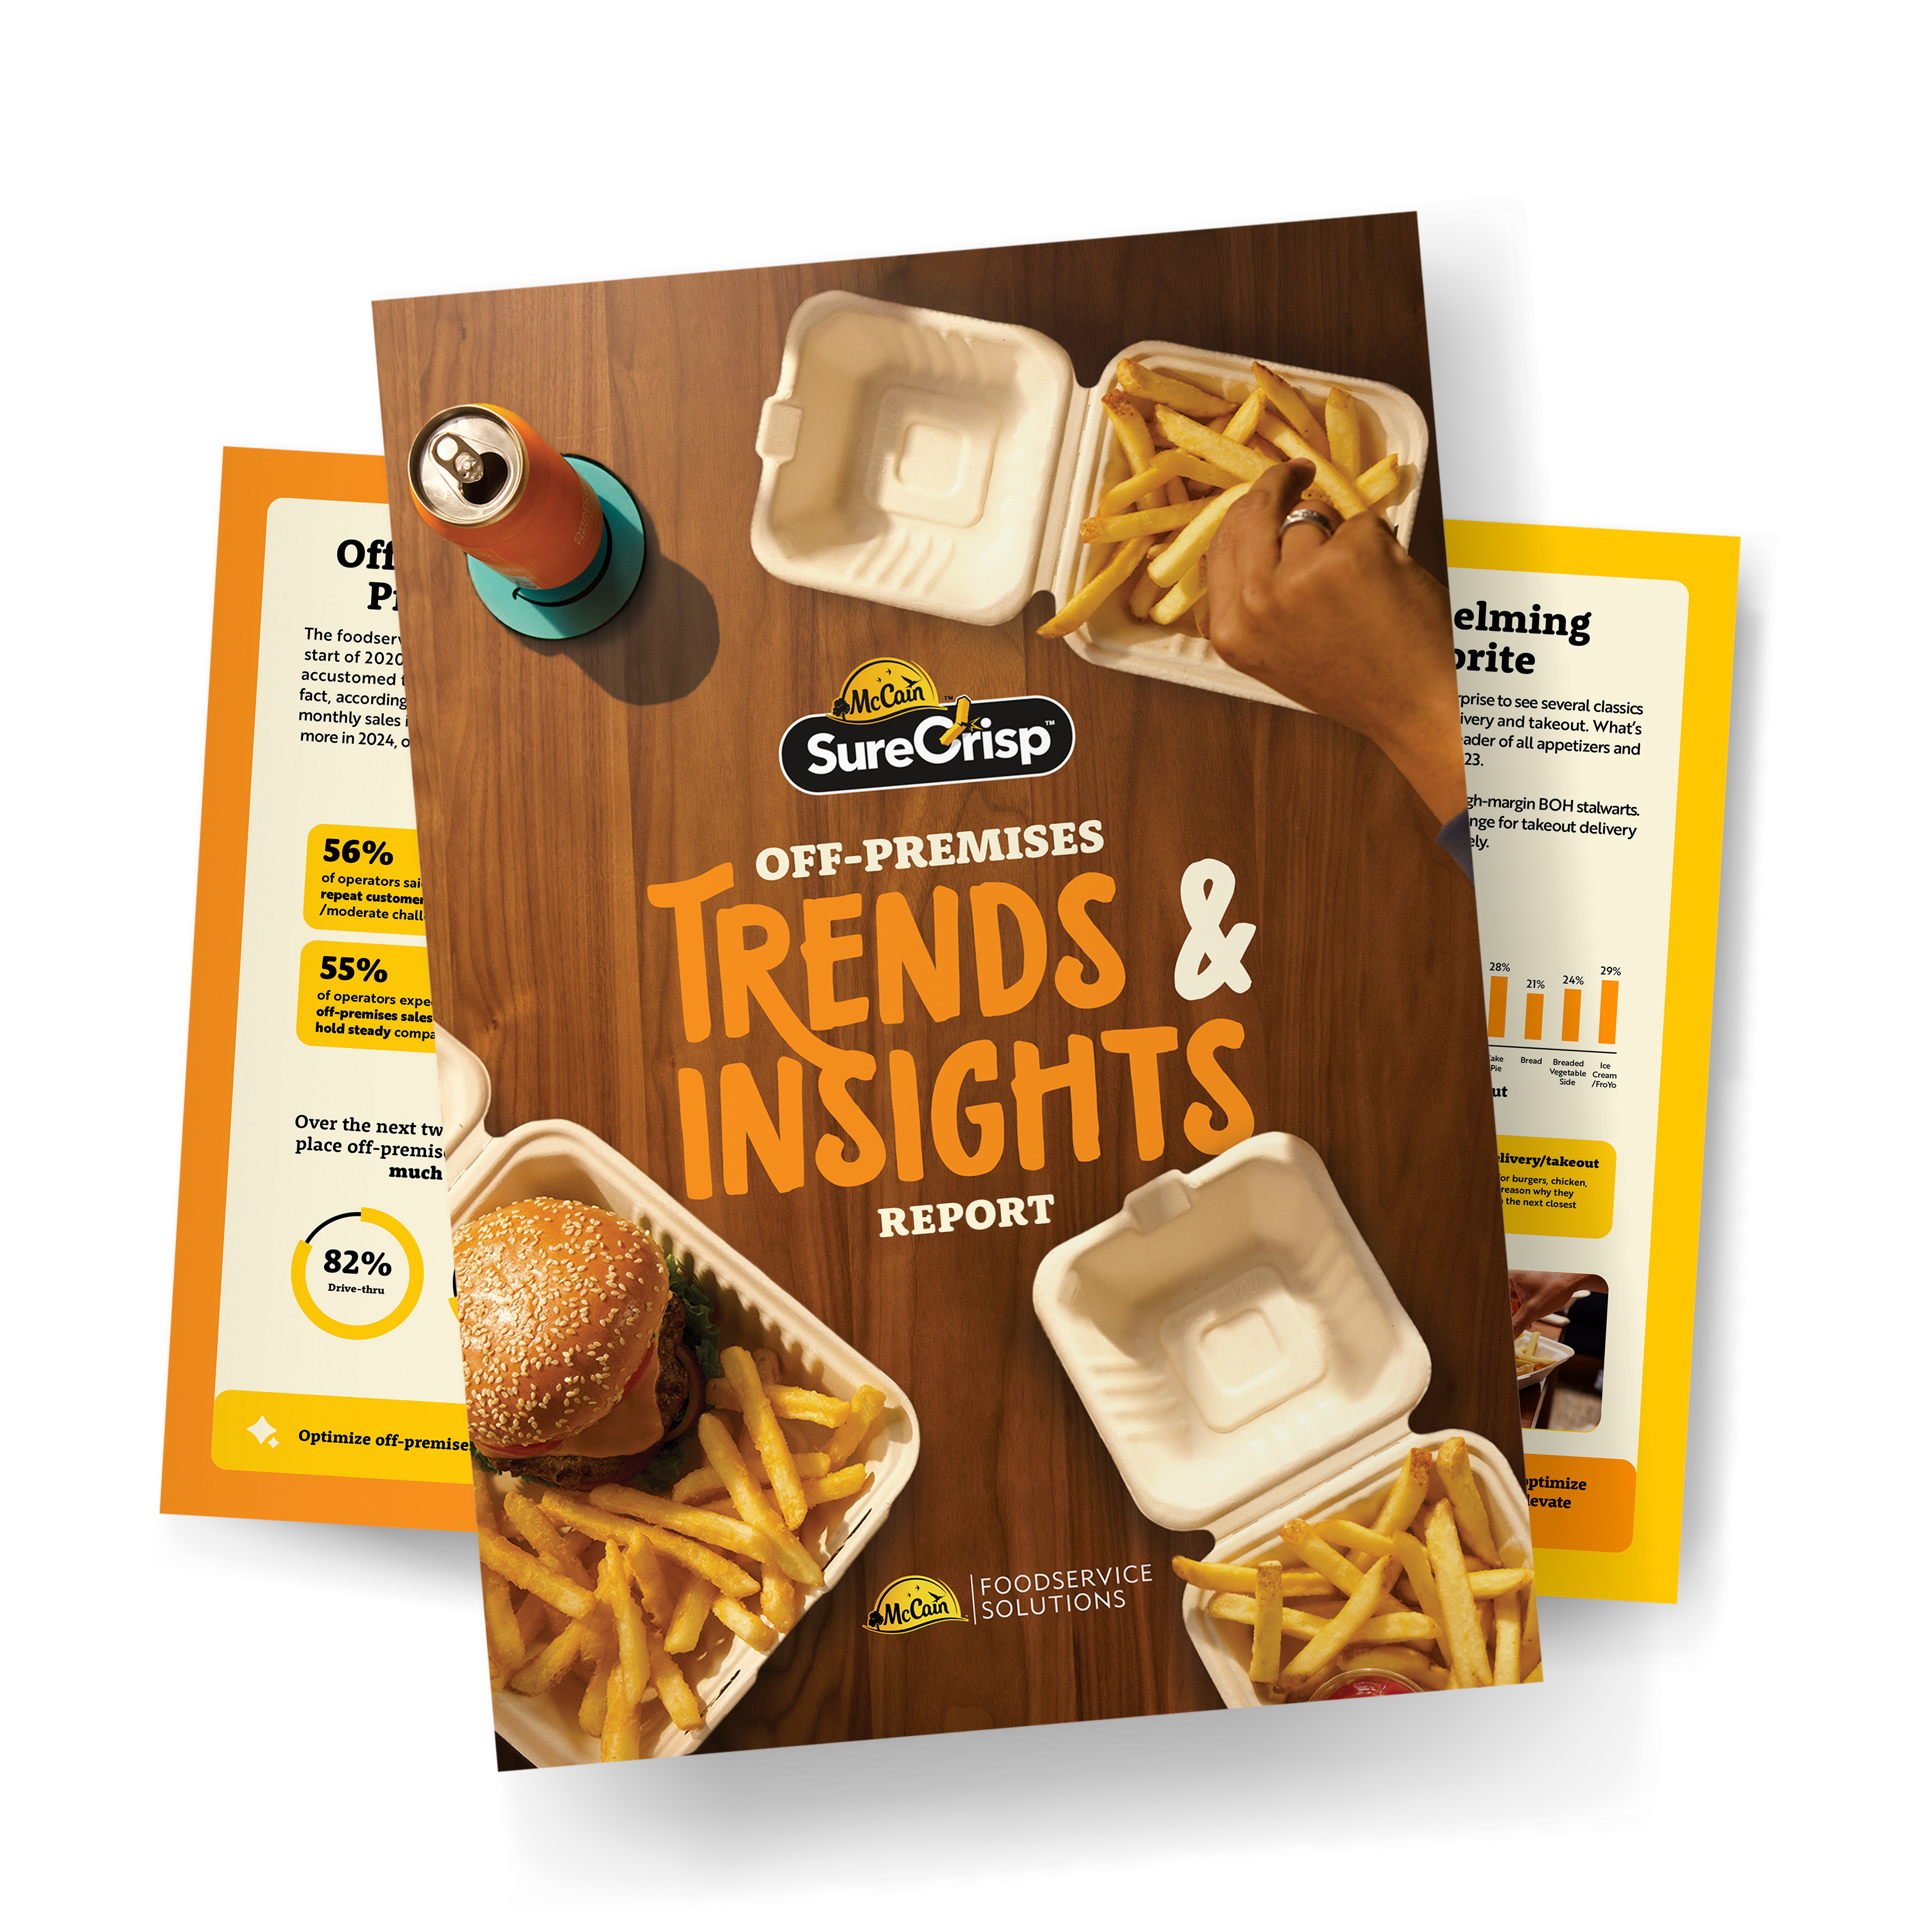 McCain® SureCrisp® Trends Report - off-premises trends & insights from McCain.